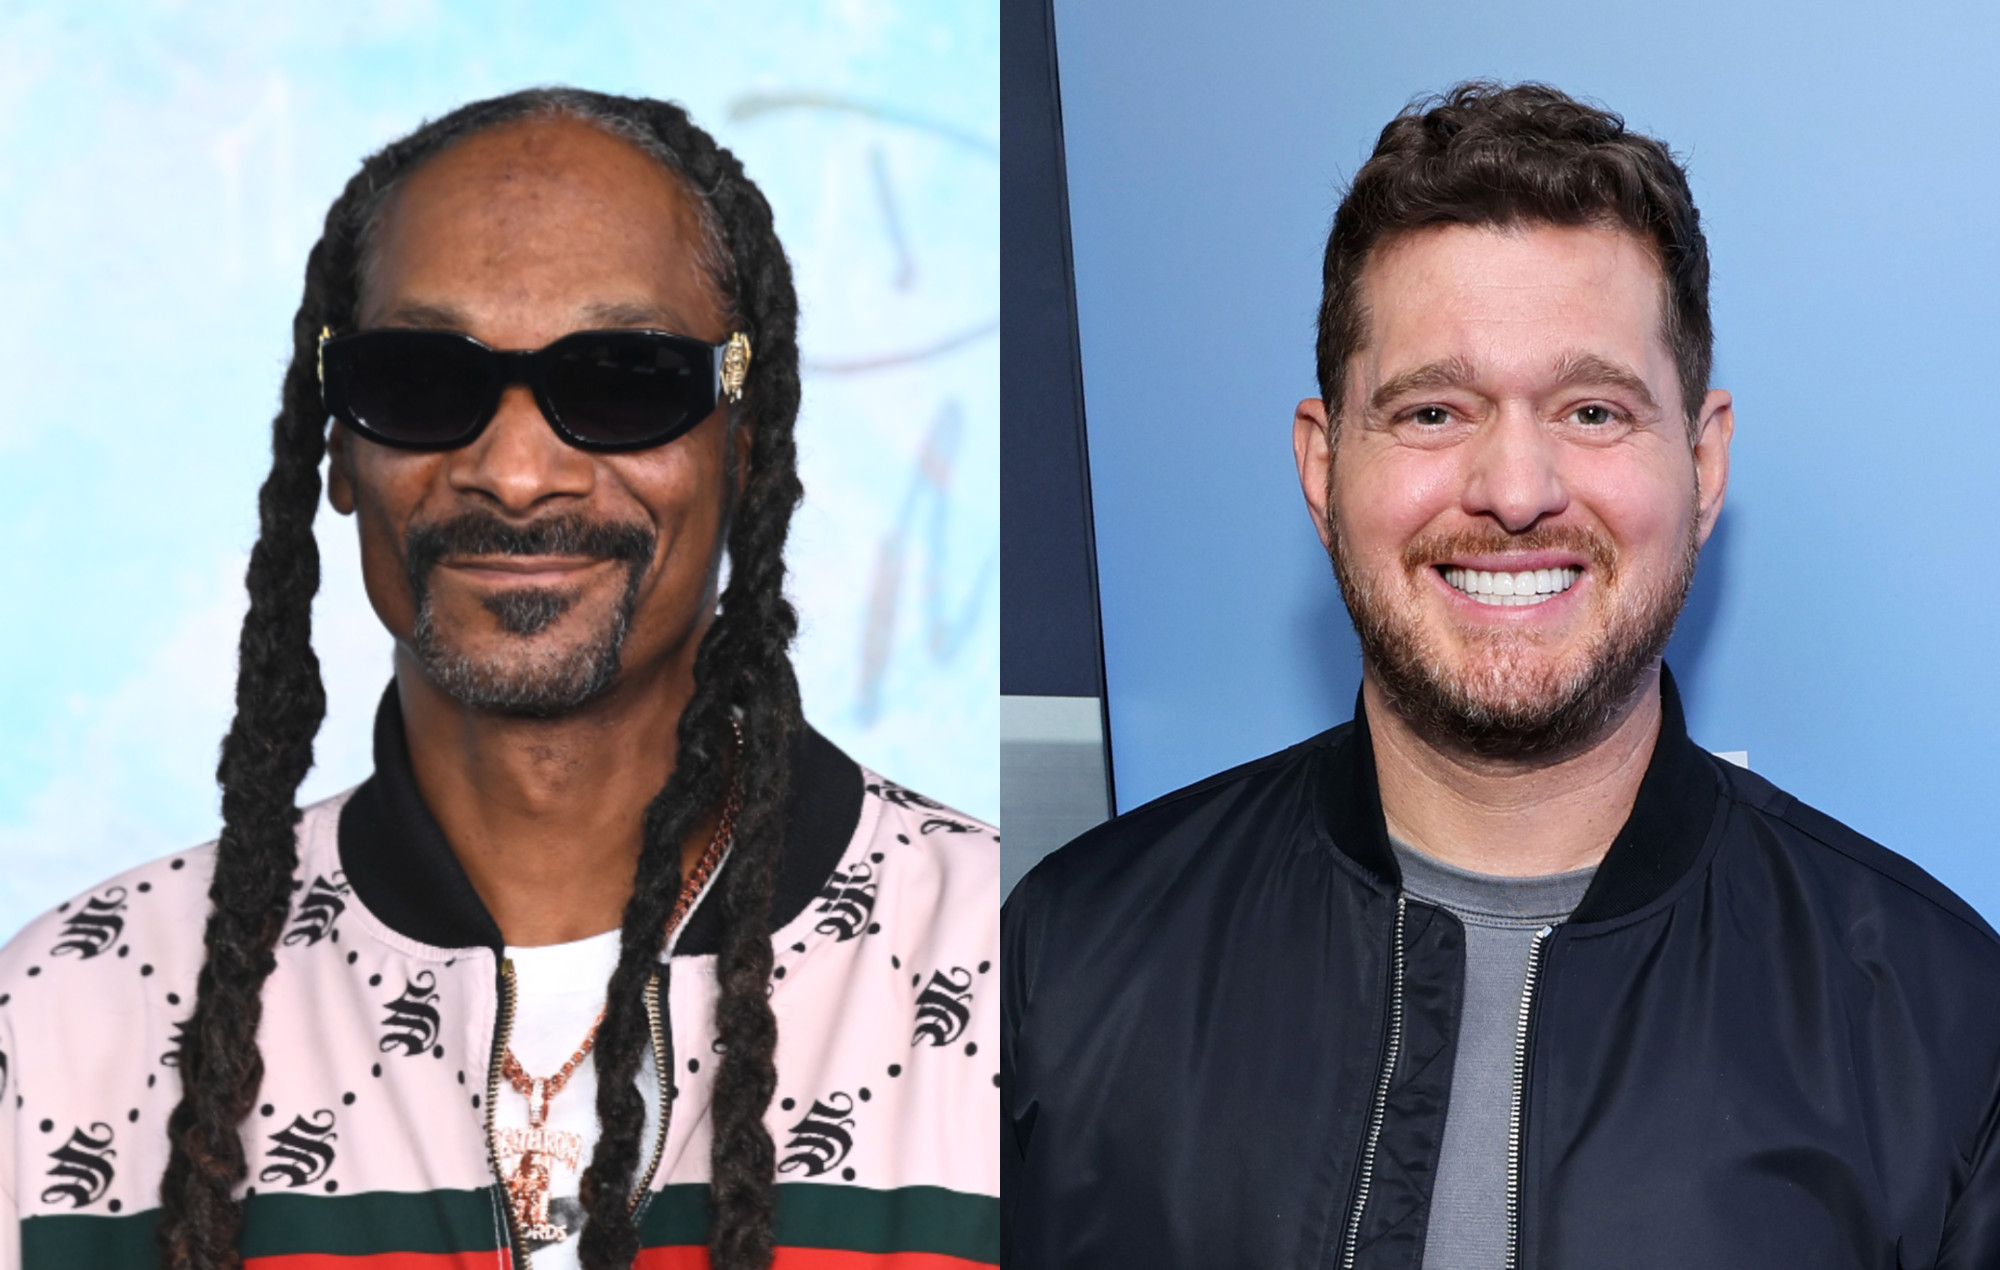 Snoop Dogg and Michael Bublé. Photo credit: Araya Doheny / FilmMagic; Cindy Ord/Getty Images